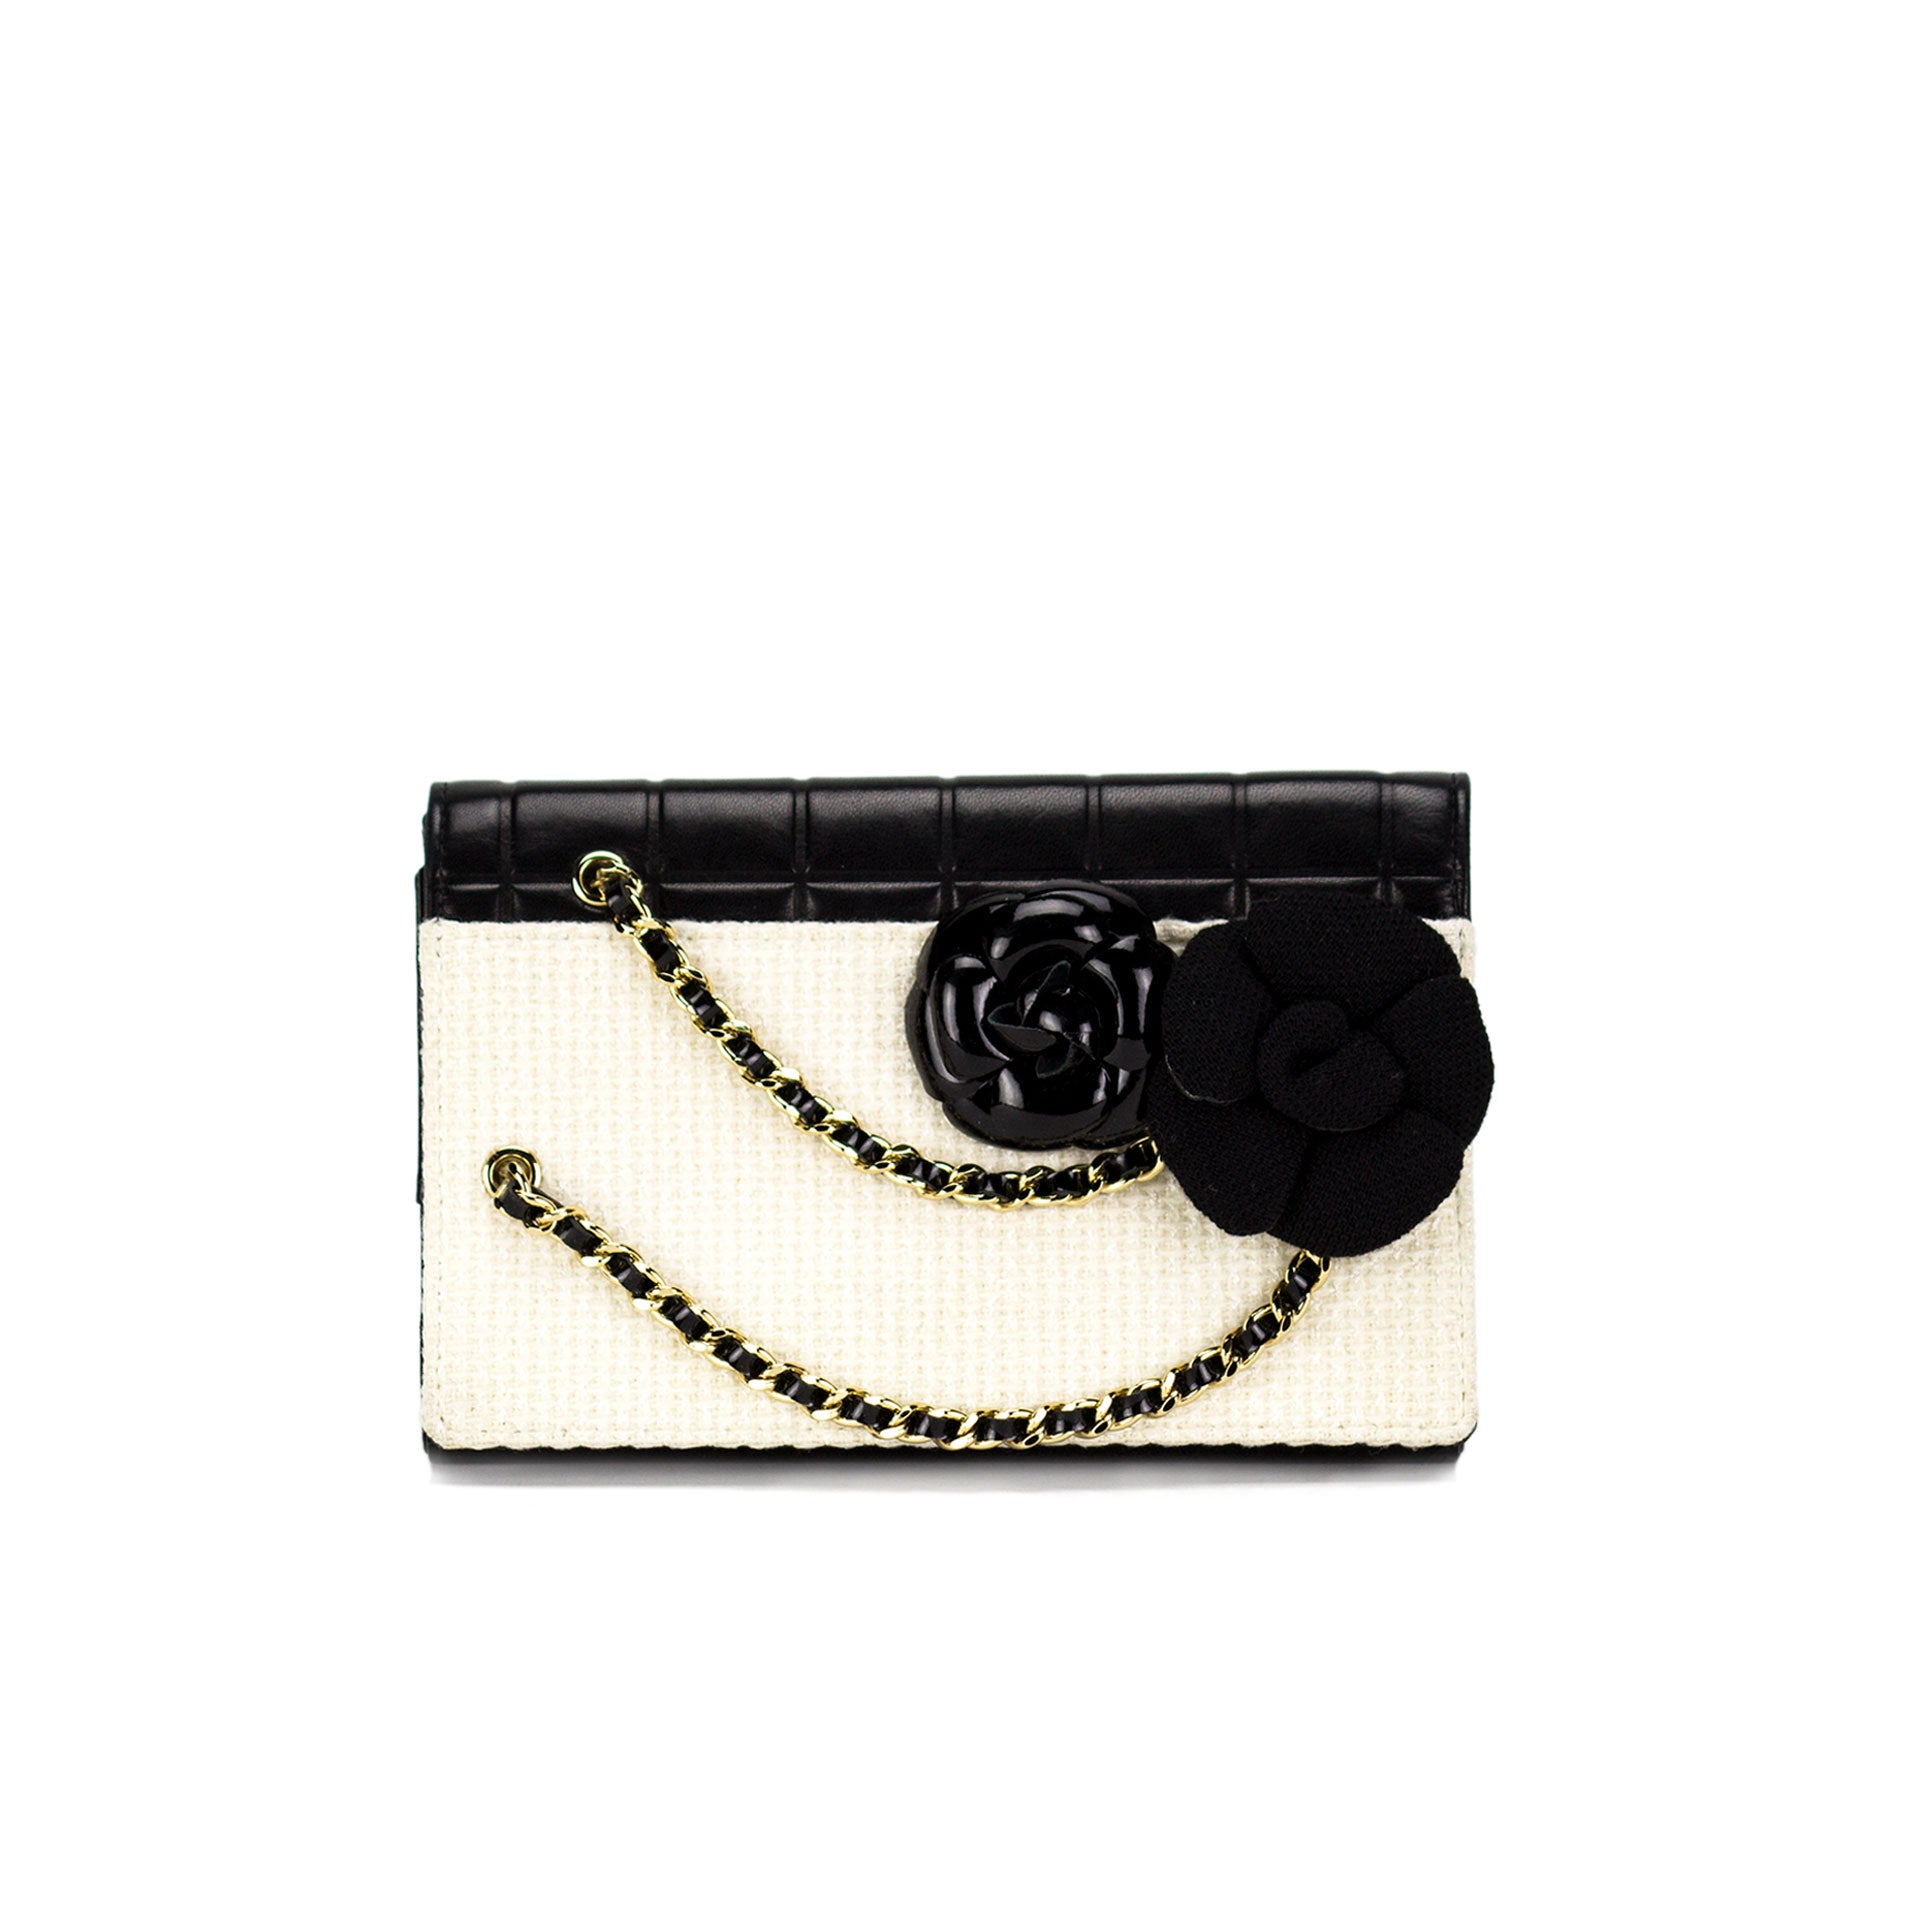 Chanel Black And White Strass Beaded CC Minaudiere Clutch With